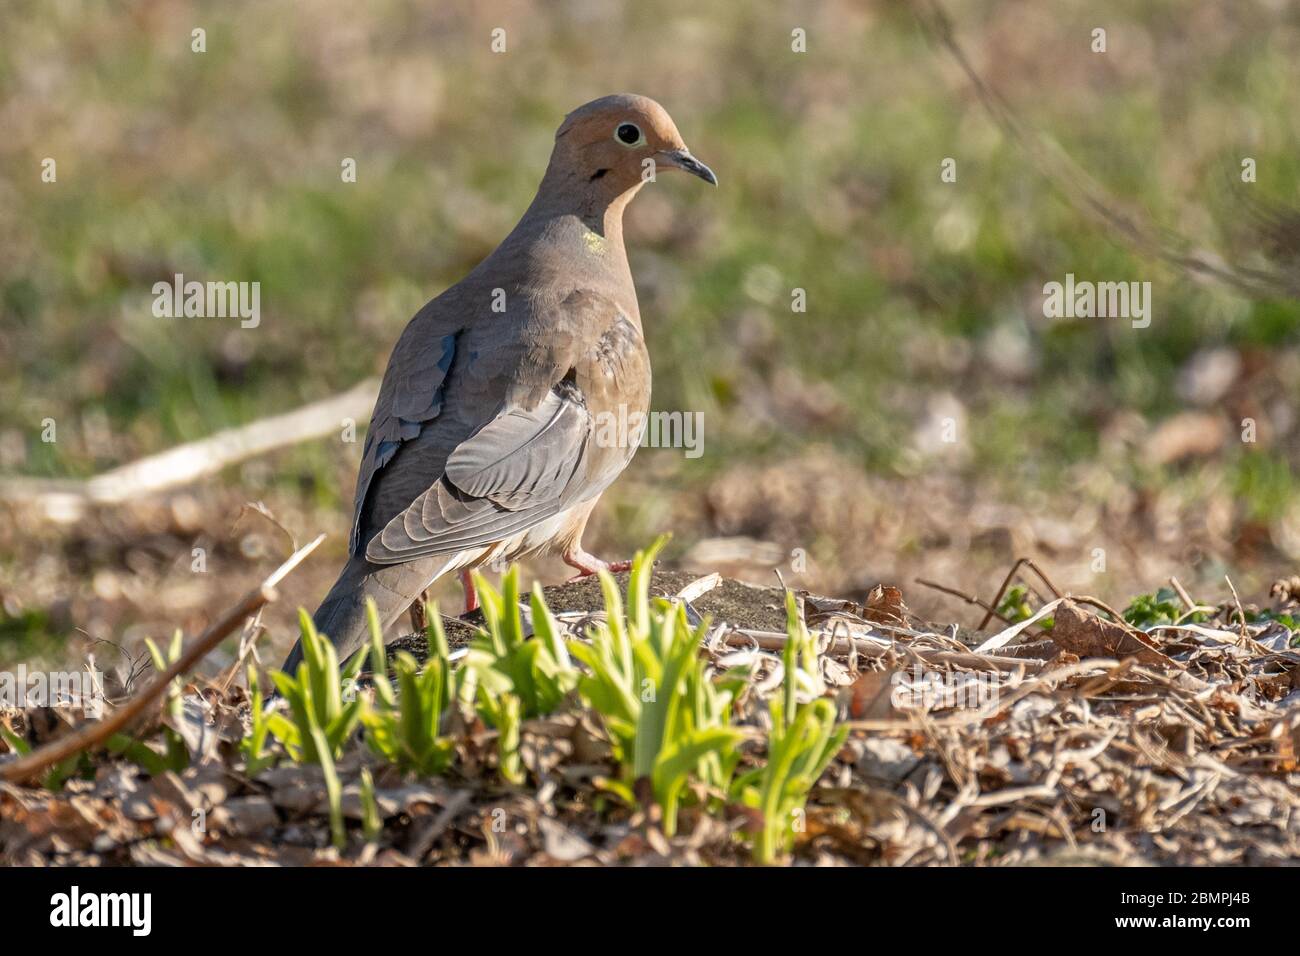 A mourning dove on the ground Stock Photo